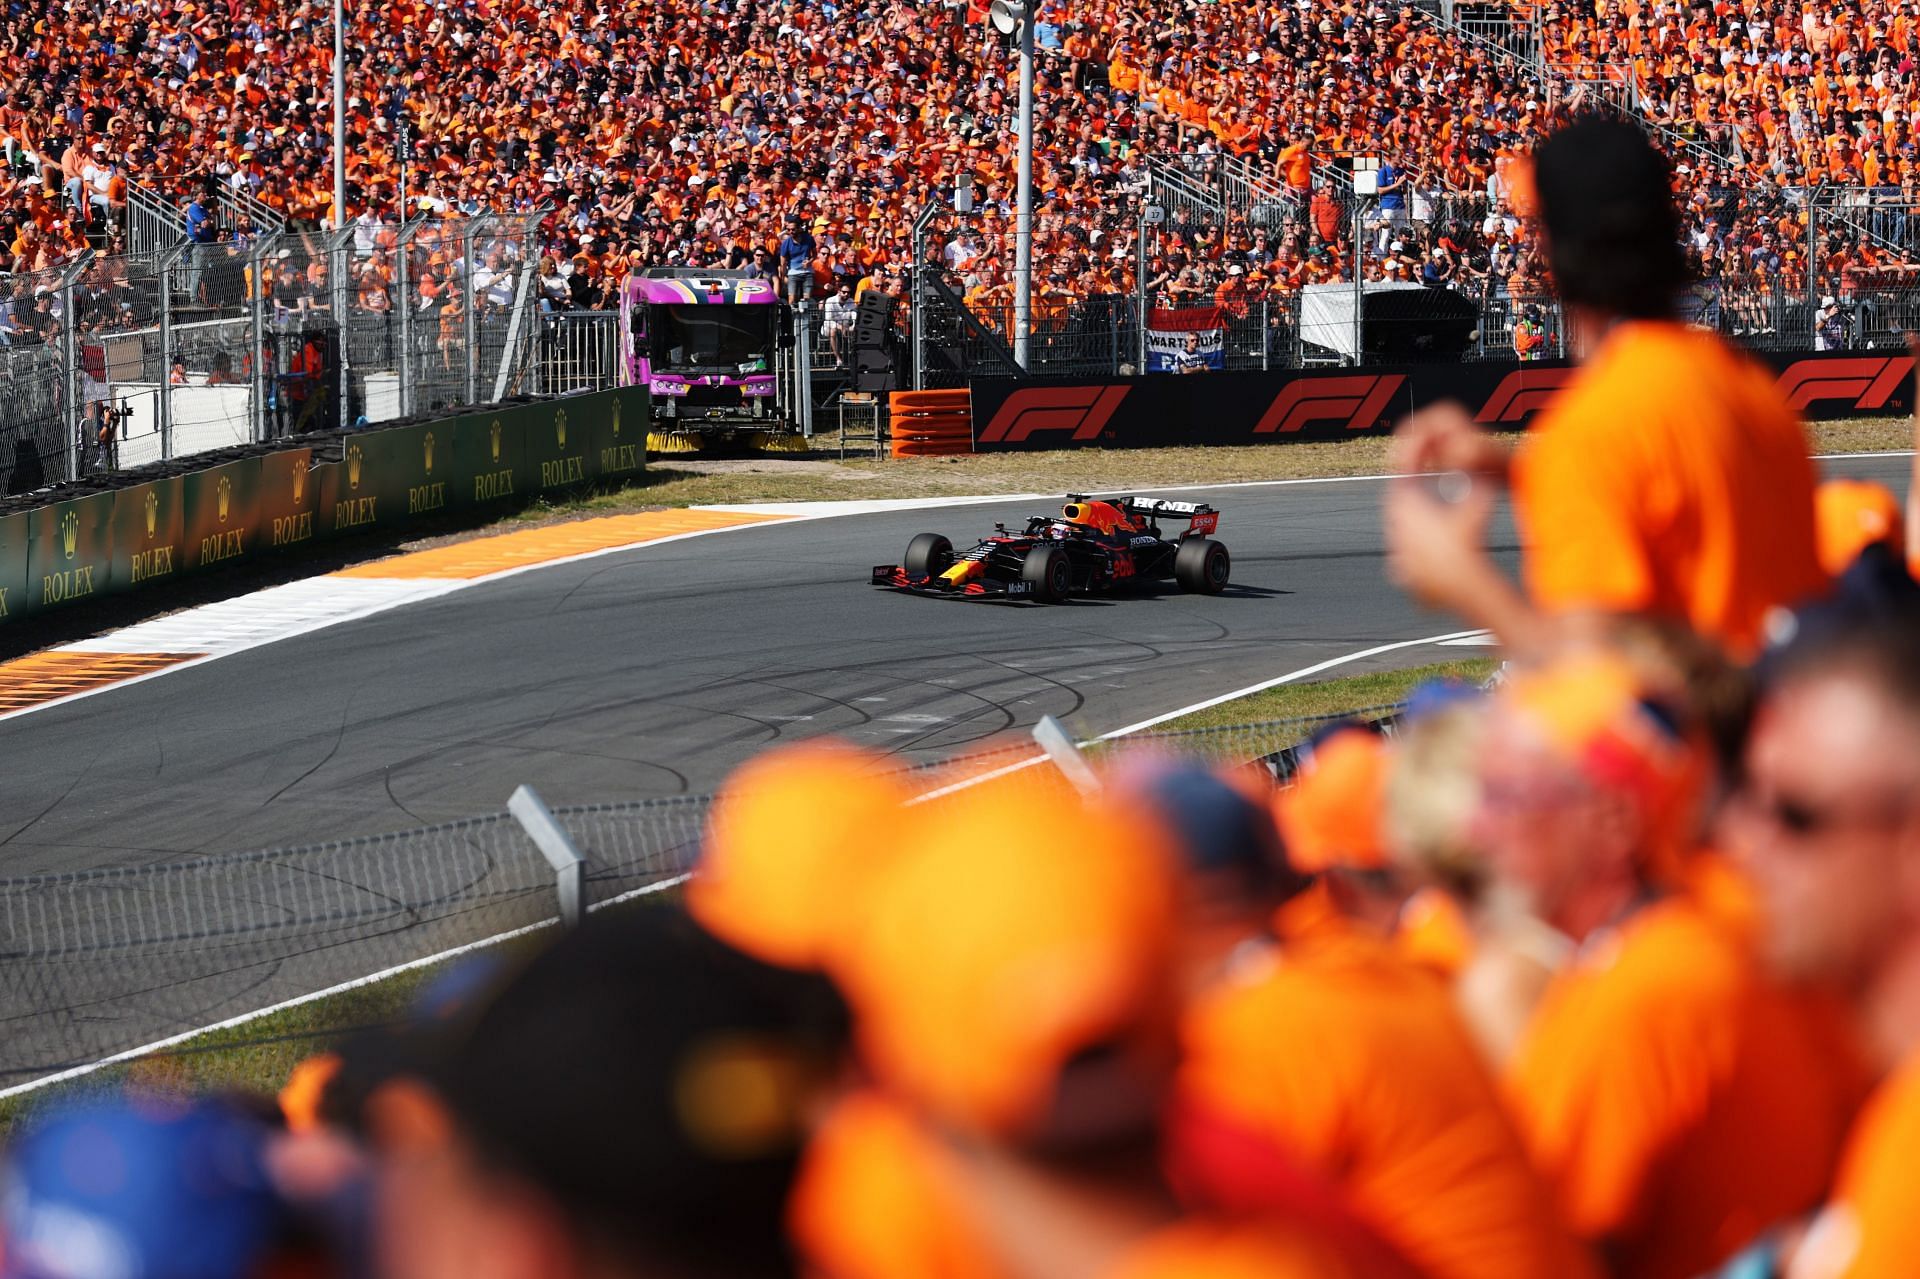 F1 Grand Prix of The Netherlands - Max Verstappen drives past his home crowd (Photo by Boris Streubel/Getty Images)